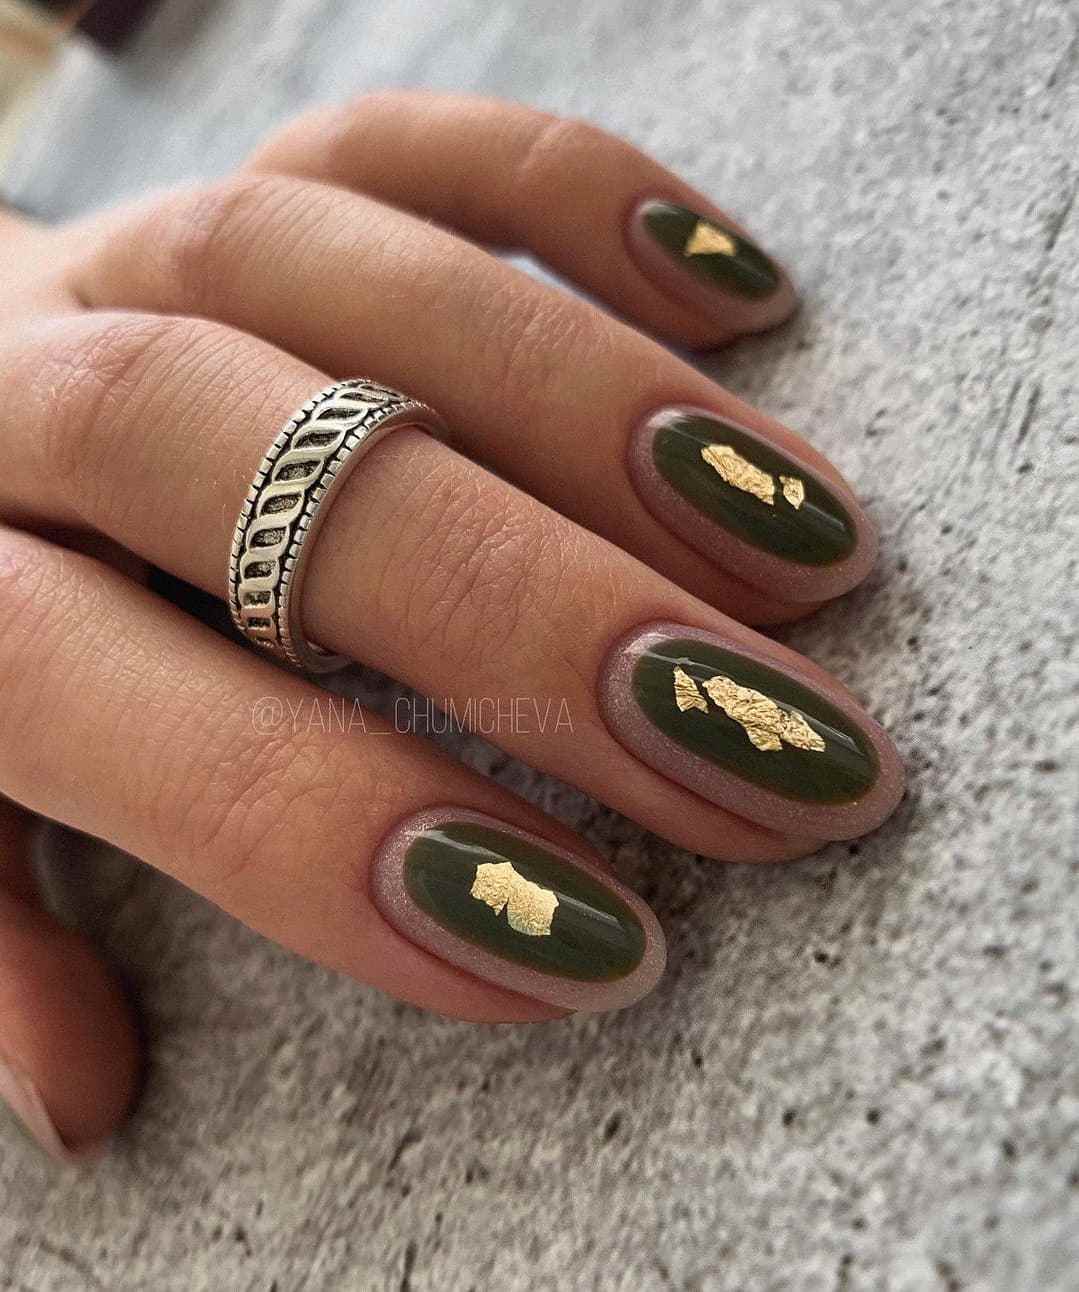 The 100+ Best Nail Designs Trends And Ideas In 2021 images 55